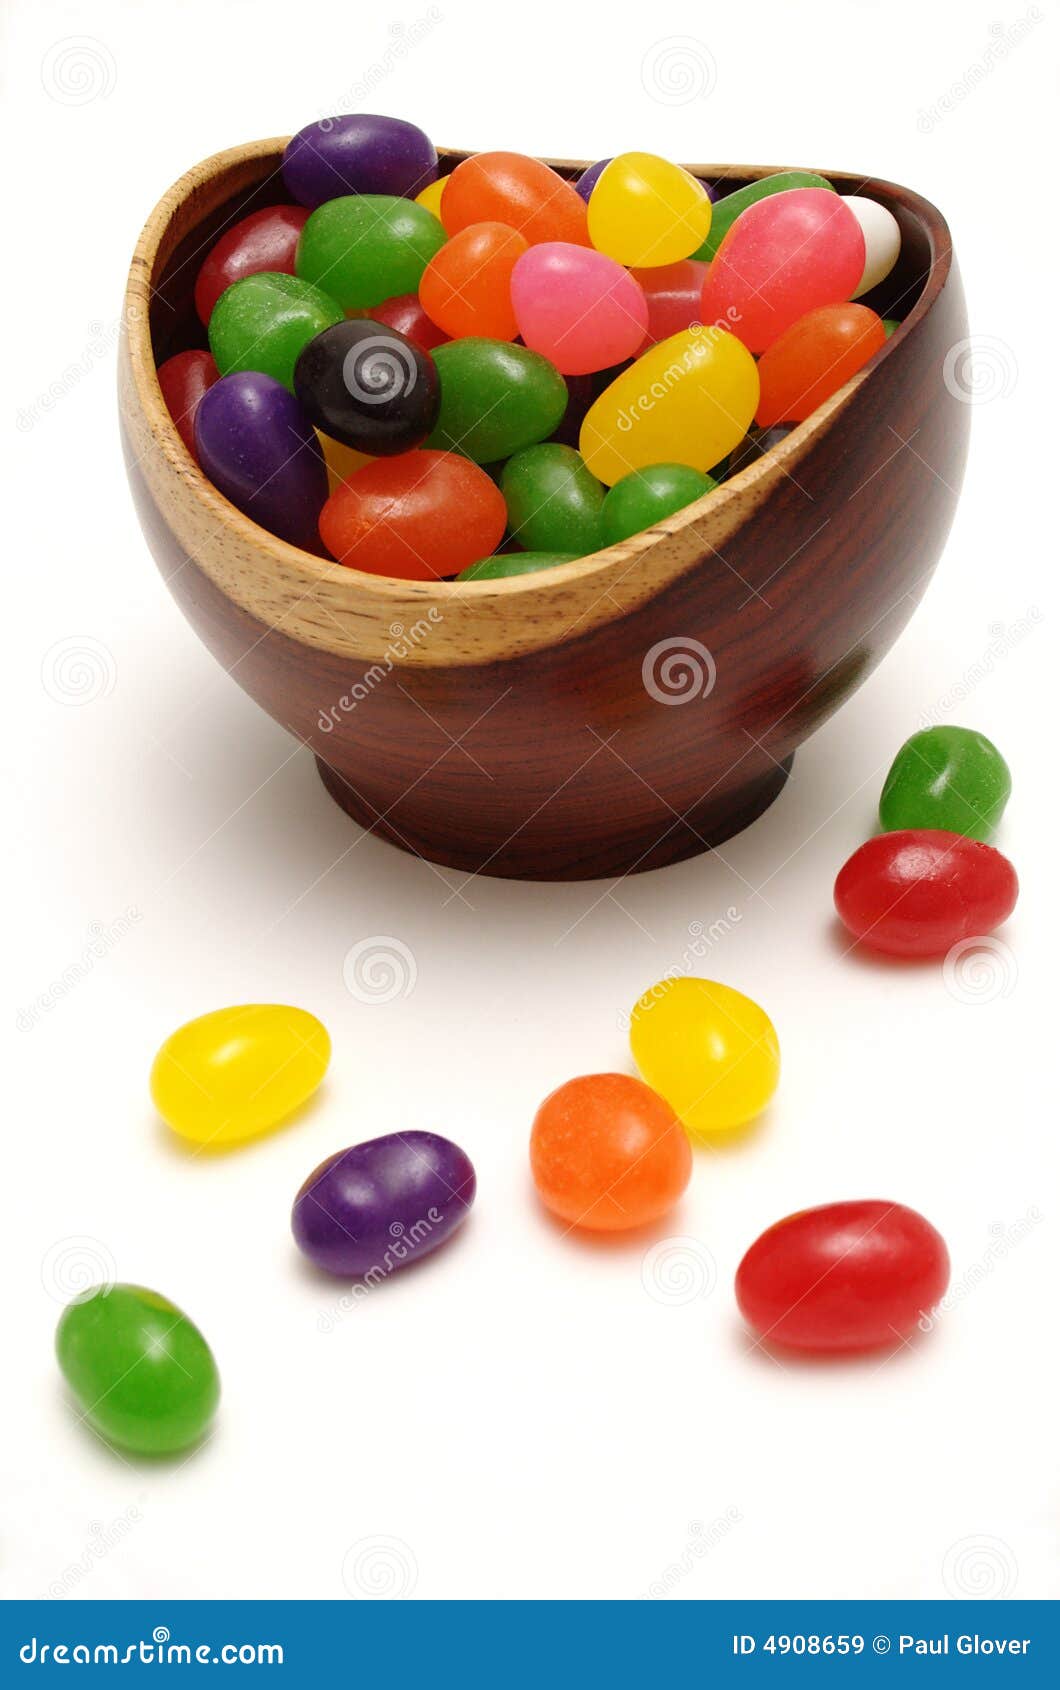 jelly beans in rosewood bowl